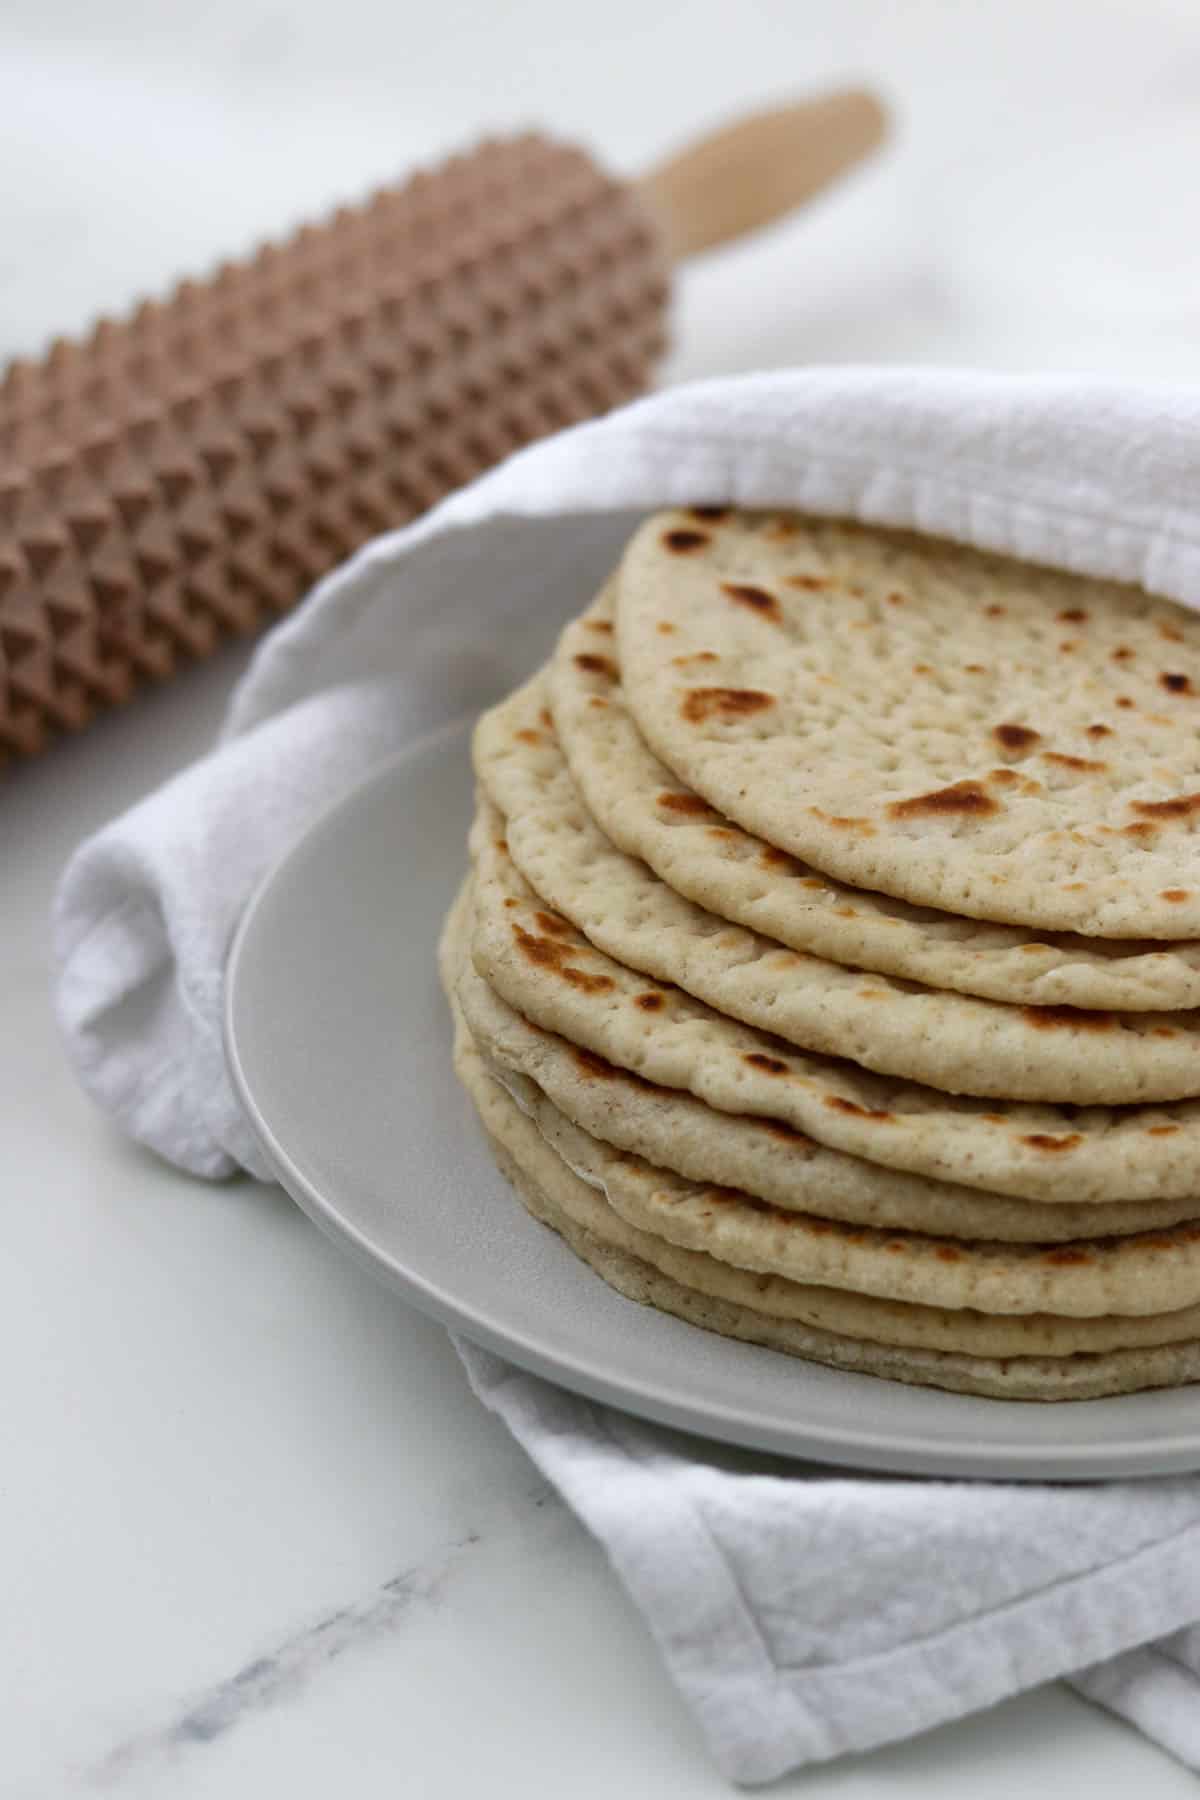 Soft Swedish Flatbreads on a plate next to a towel and a spiky rolling pin.